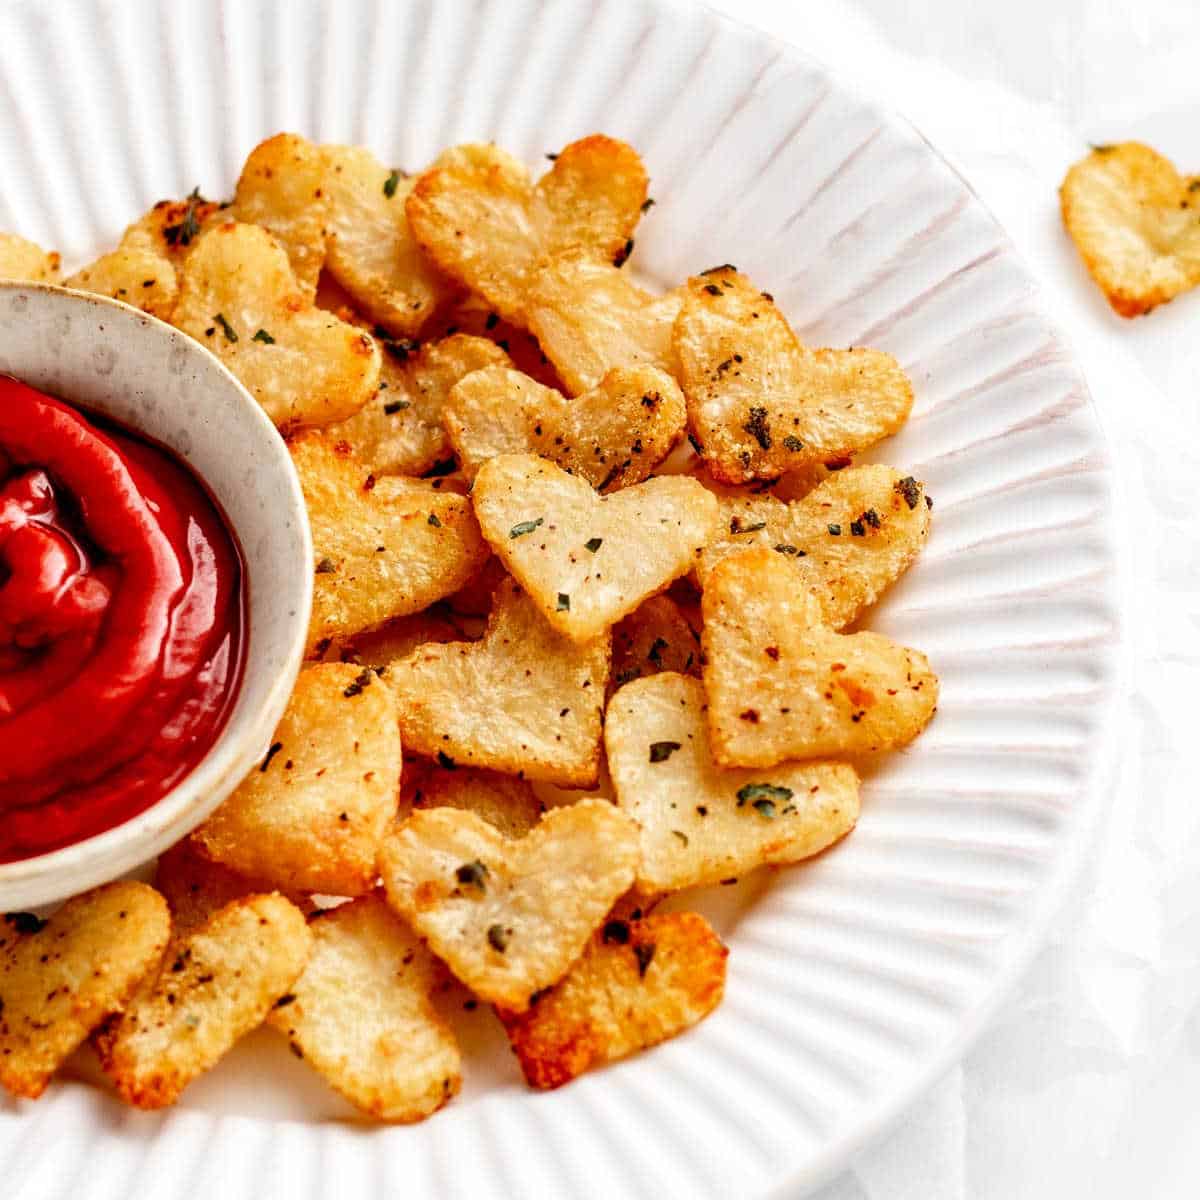 Roasted heart potatoes on a white plate with a small bowl of ketchup.